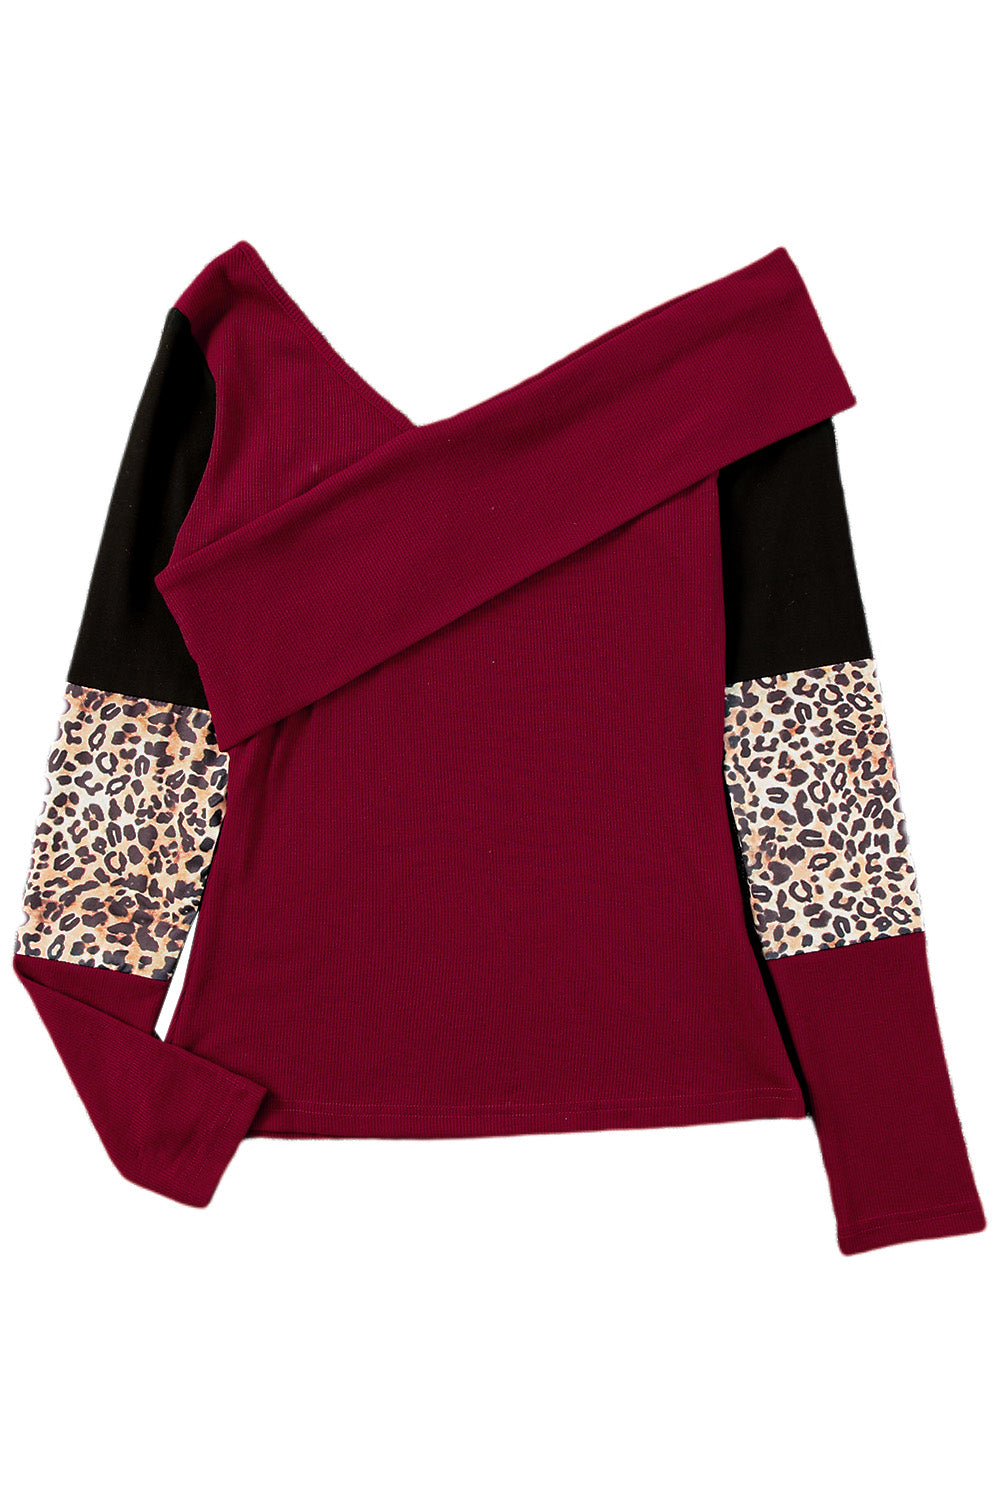 Fiery Red Leopard Color Block Ribbed Cross Wrap Top